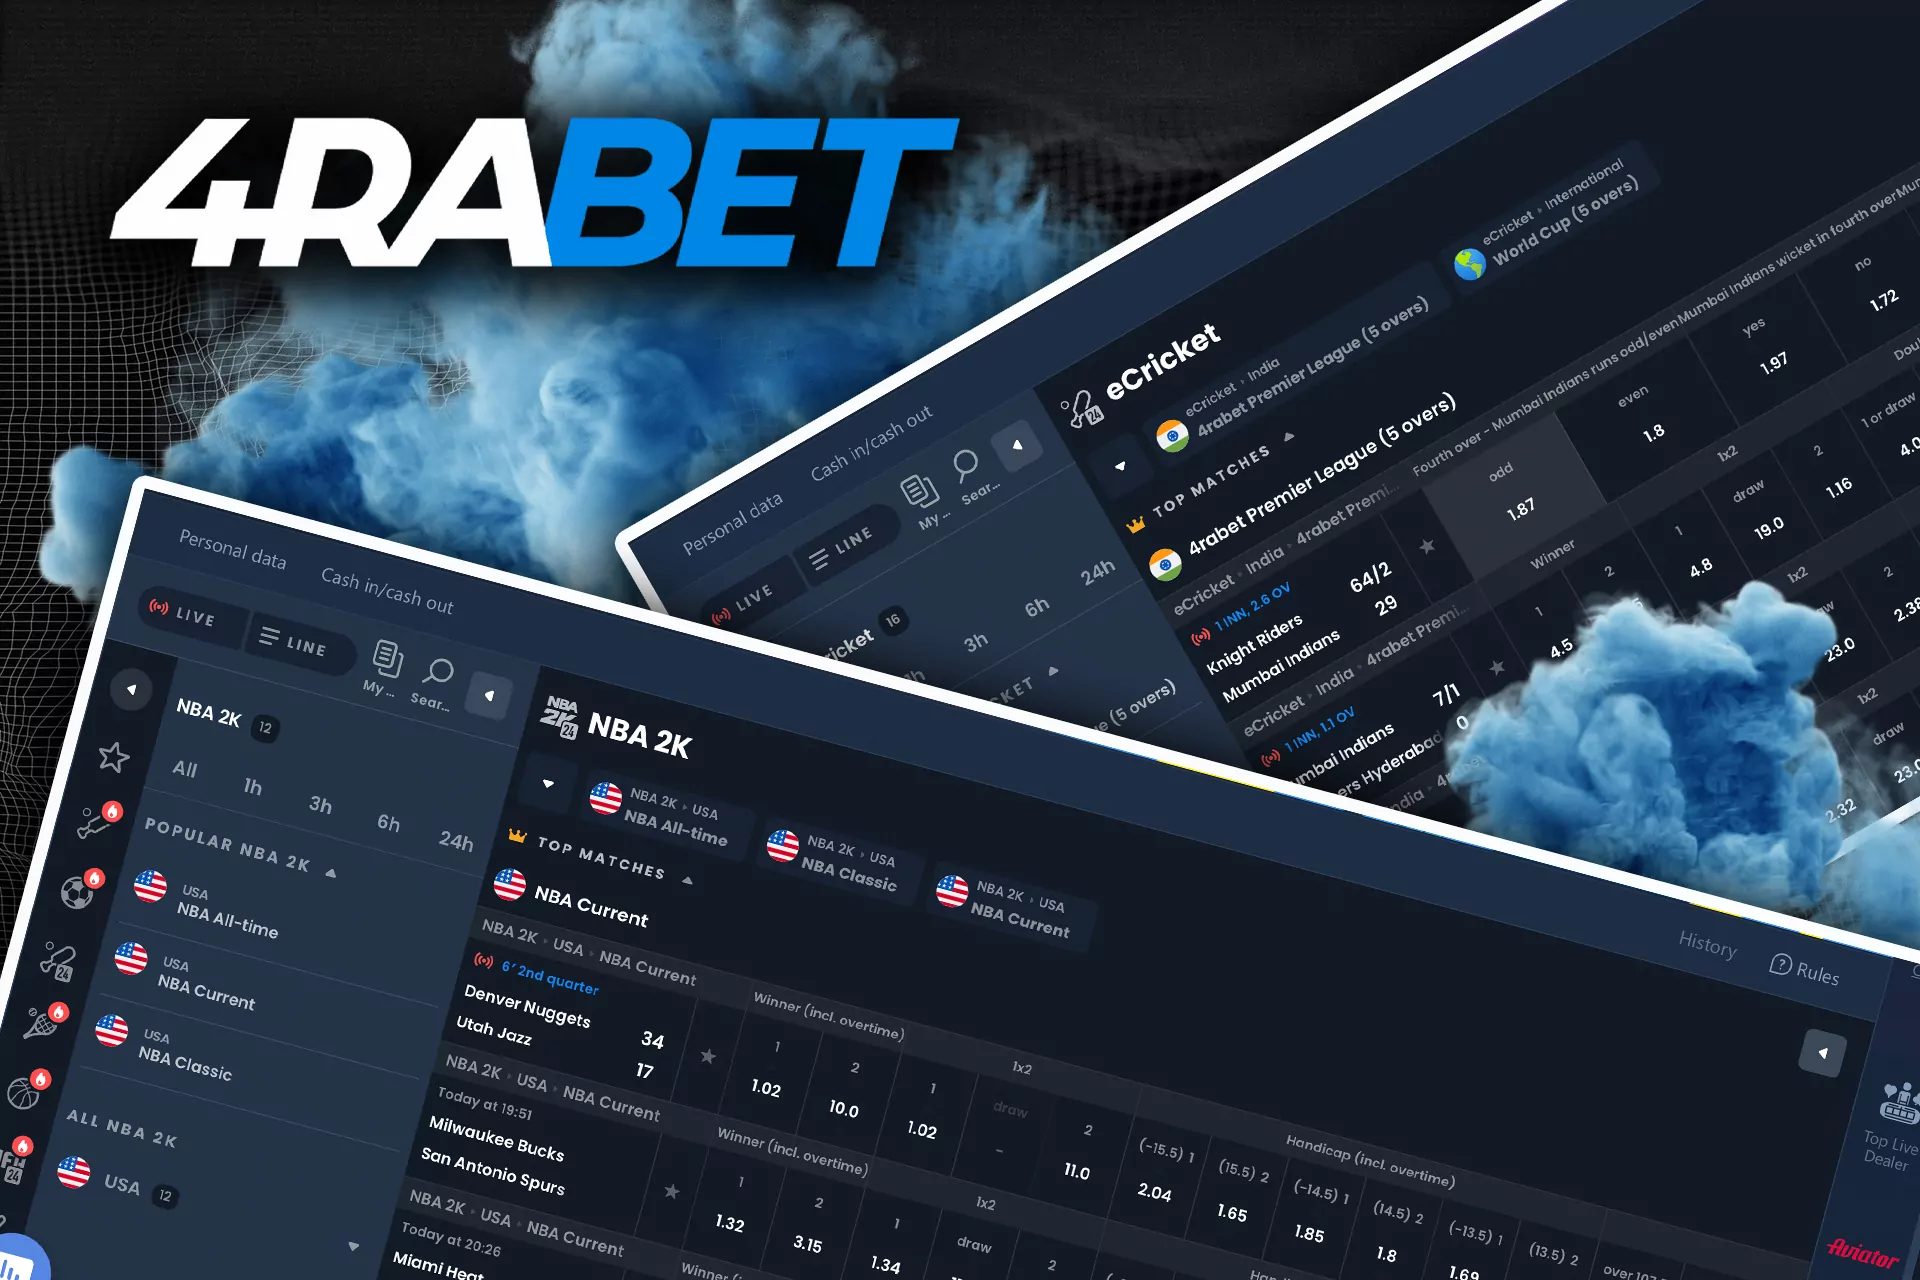 In the 4rabet sportsbook you can also bet on cybersports such as FIFA, Starcraft, NBA and other.